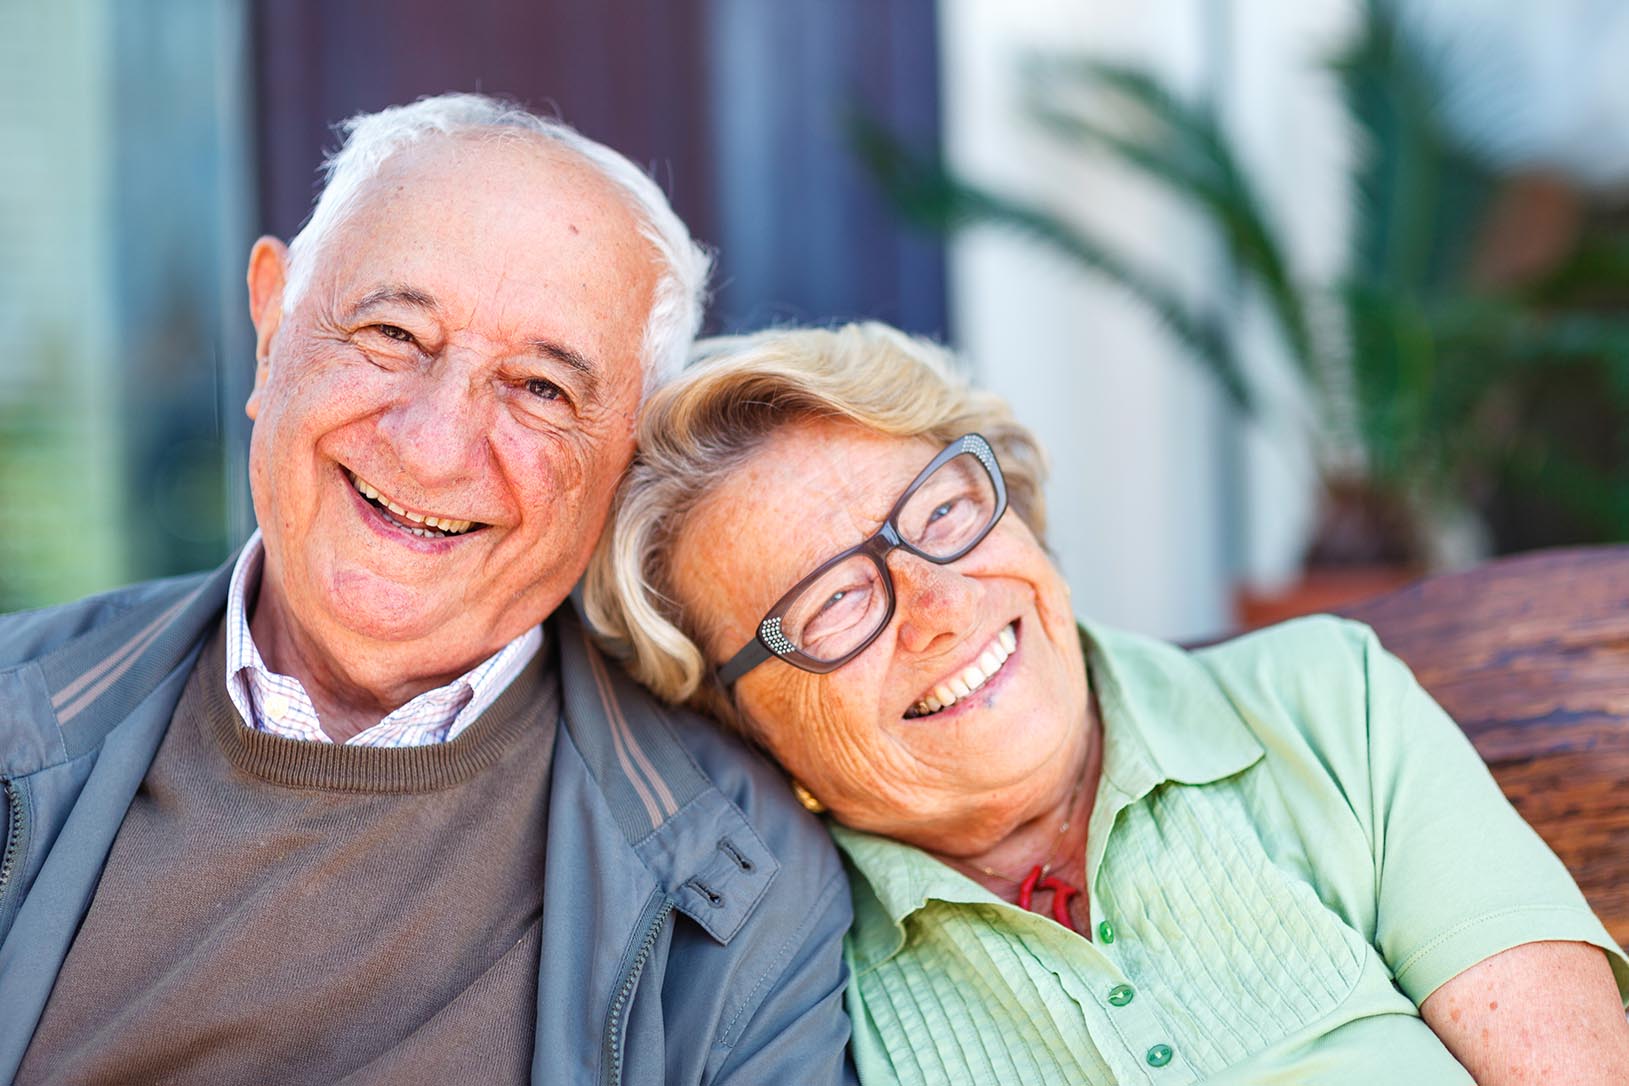 A Varenita of Simi Valley senior couple is laughing. She has her head on his shoulder. She is wearing glasses and a green shirt. At her neck, she has a red pendant. He is wearing a blue jacket, a brown sweater and a white shirt. They are sitting on a wooden bench.